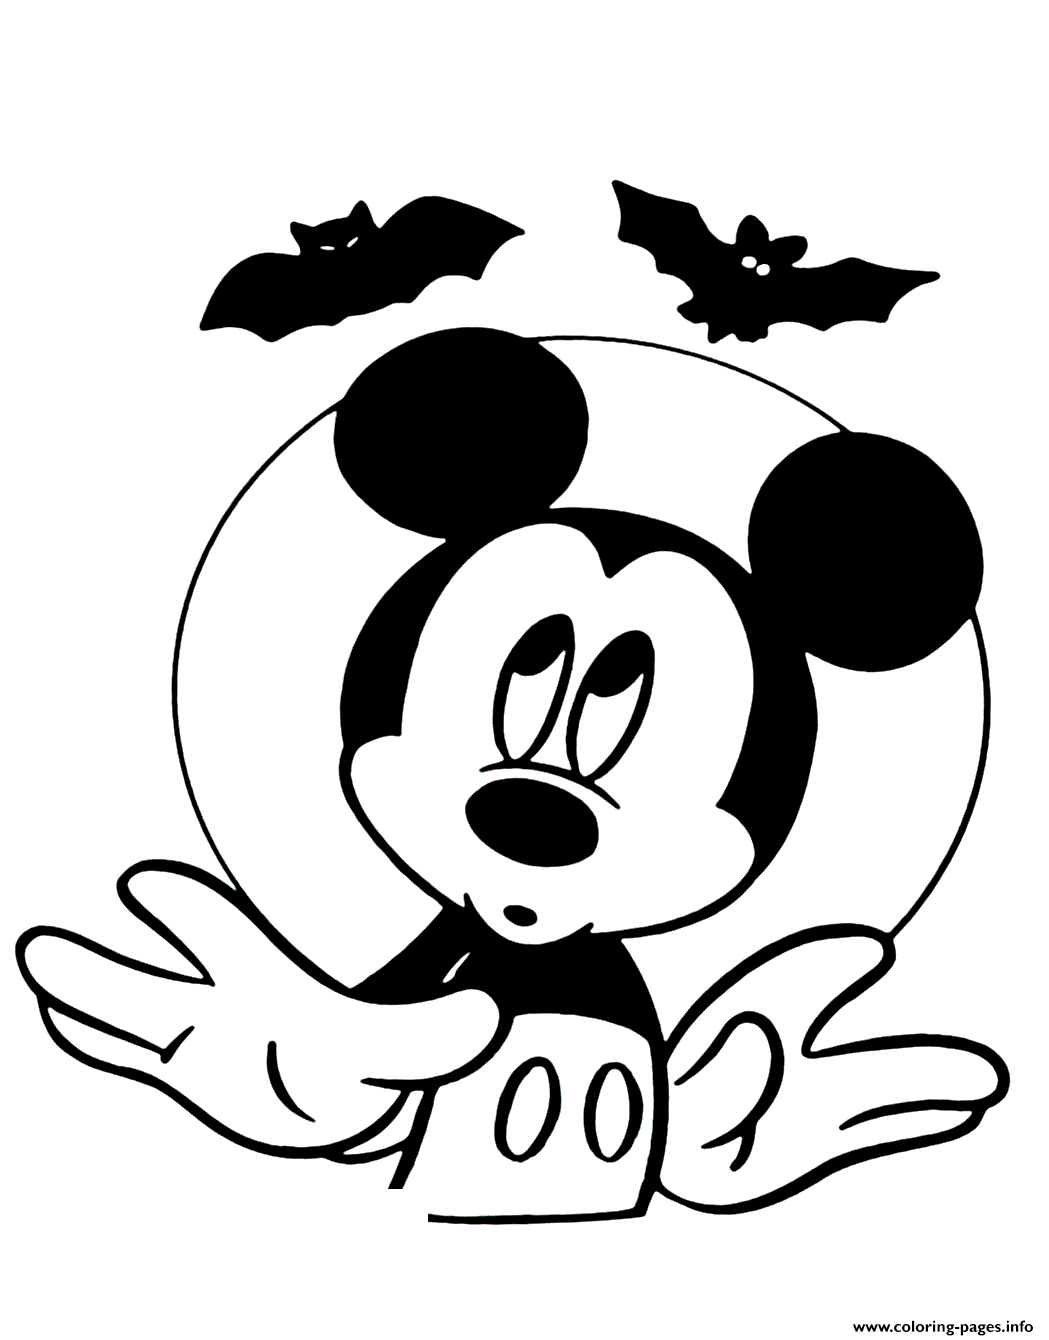 Printable Mickey Mouse Halloween Coloring Pages coloringpages2019